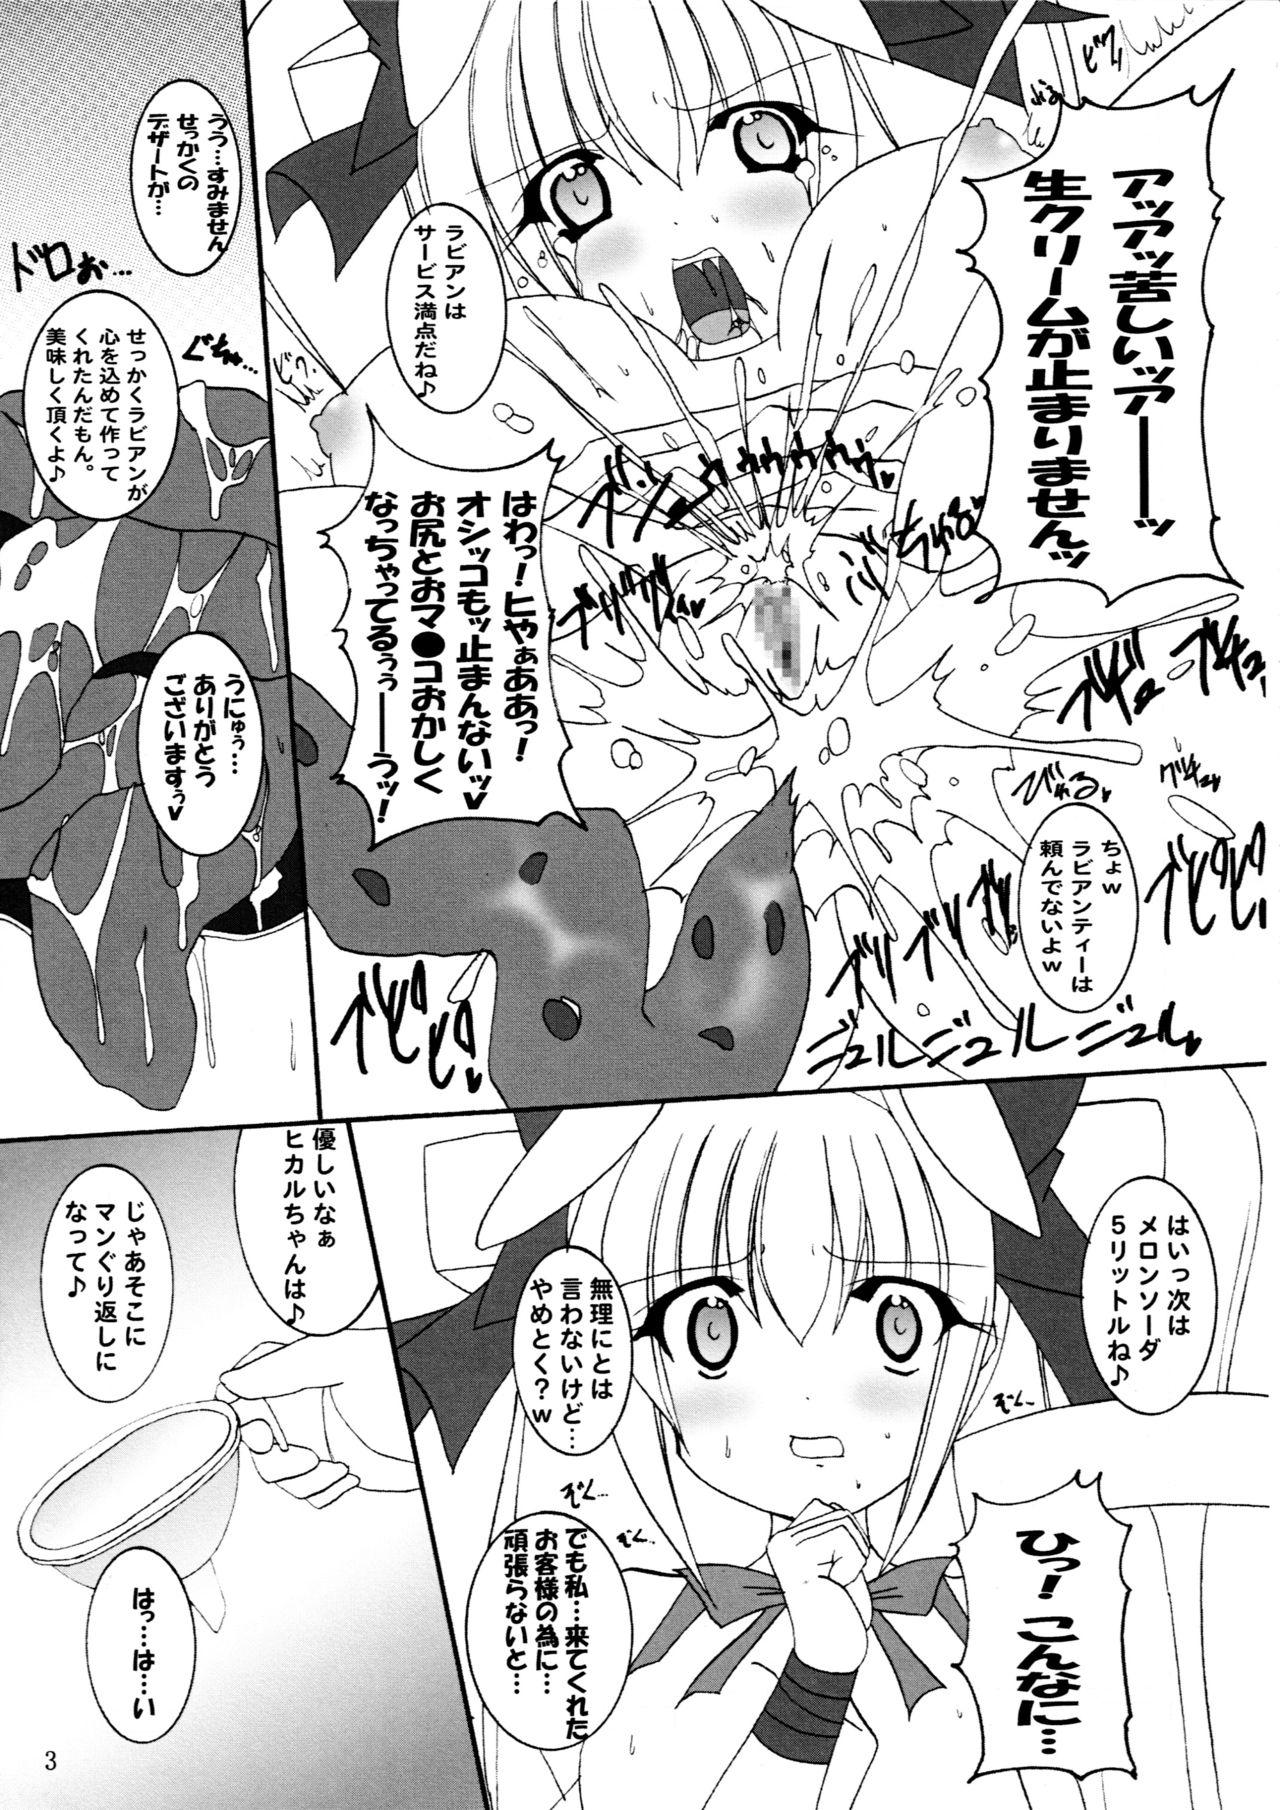 Gets Hitori Twintail & Abnormal Carnival - Di gi charat Assfingering - Page 4